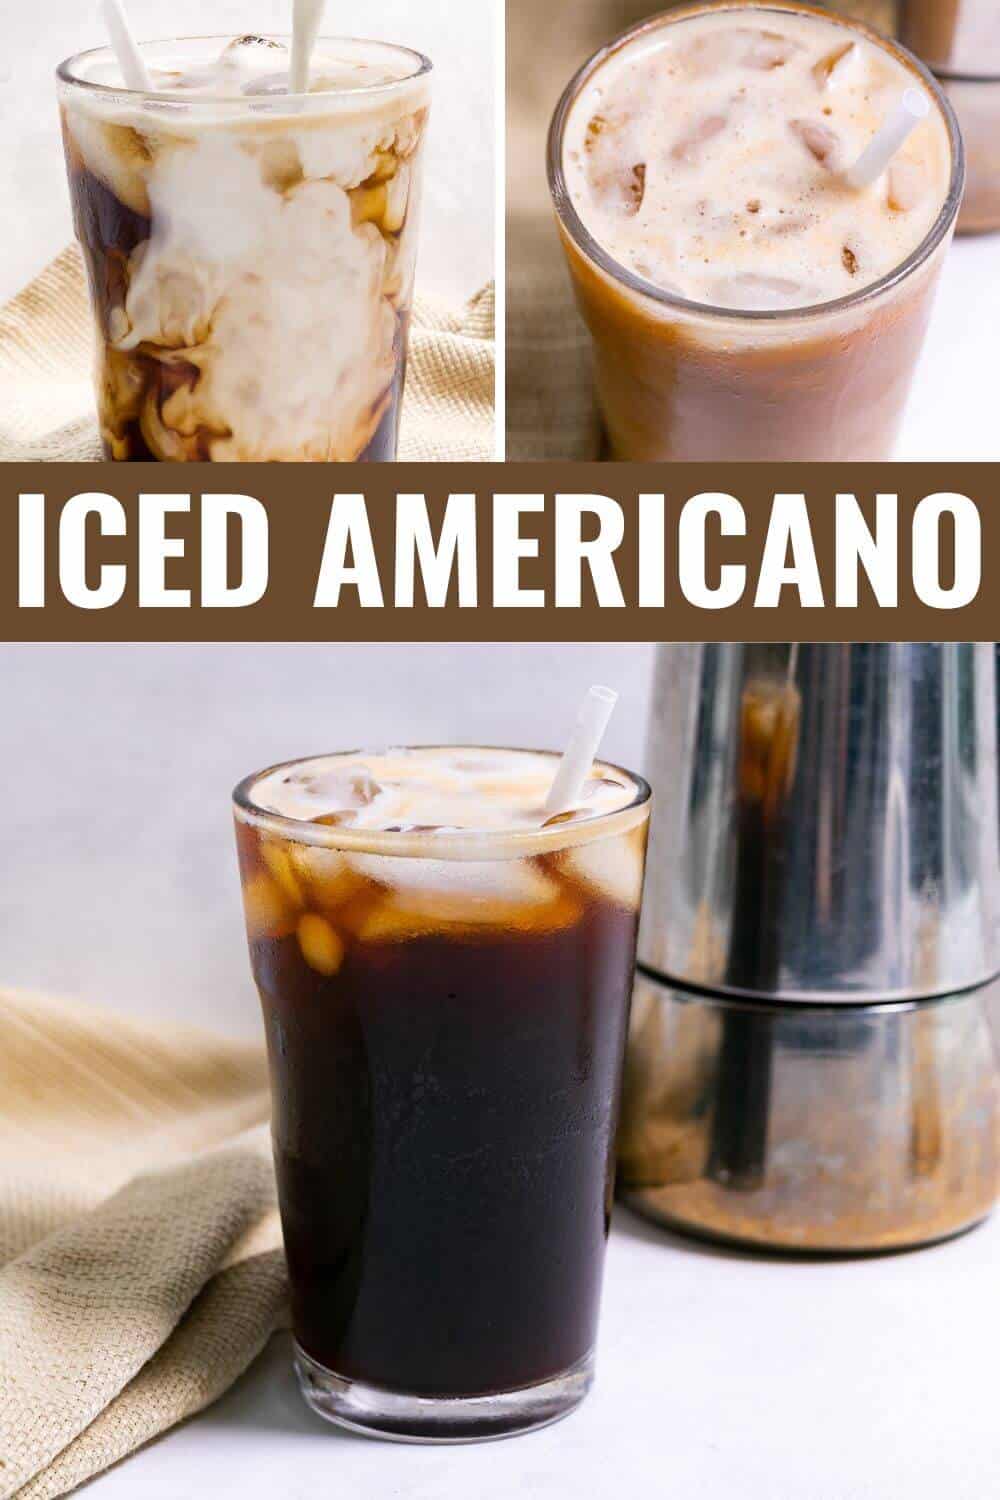 Iced Americano with process shot and recipe title text overlay.